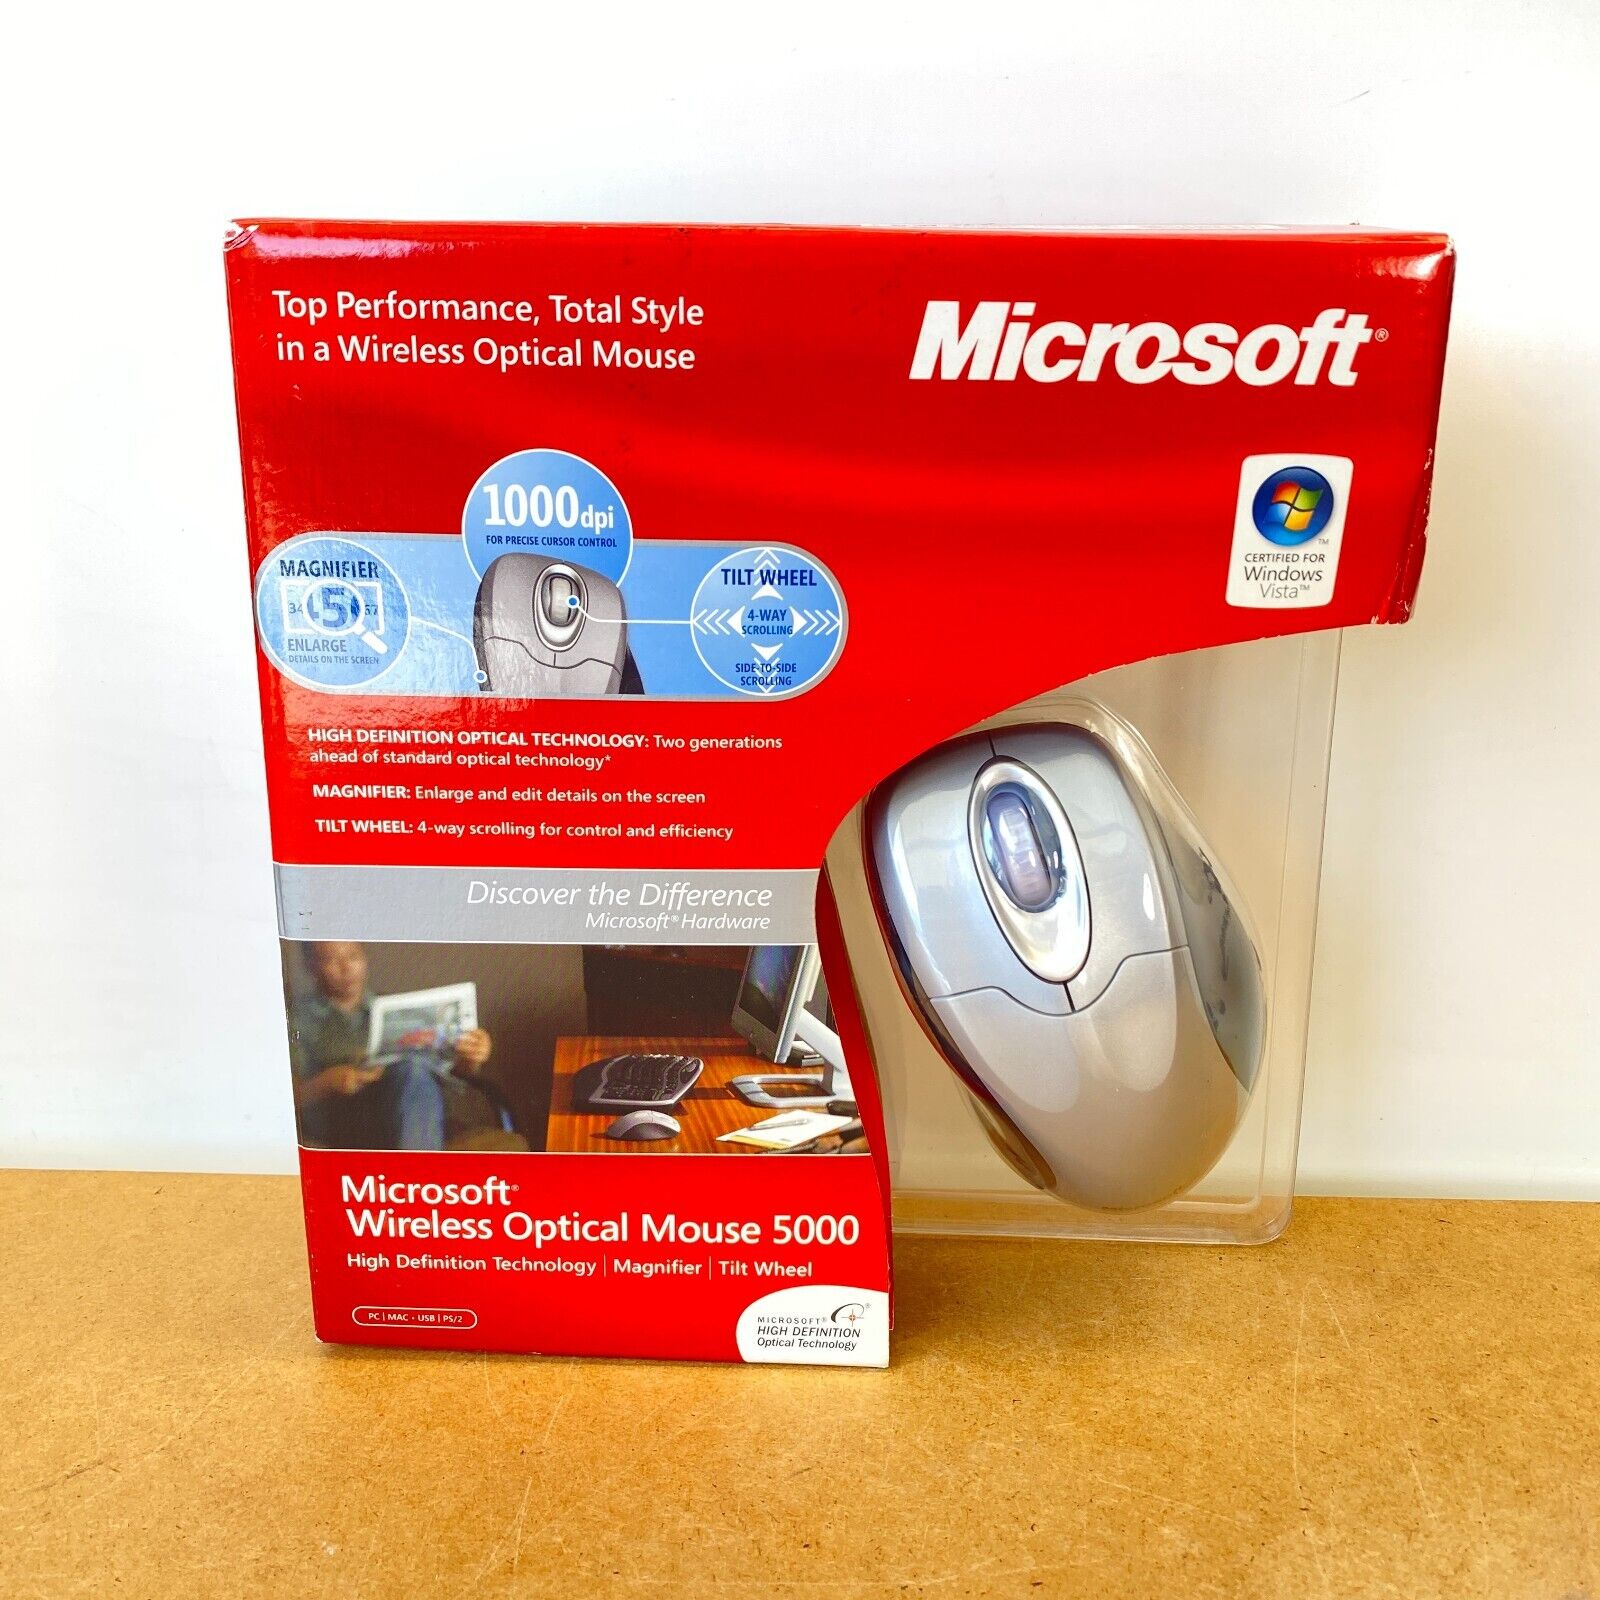 Microsoft Wireless Optical Mouse 5000 Brand New Sealed Package FAST SHIPPING